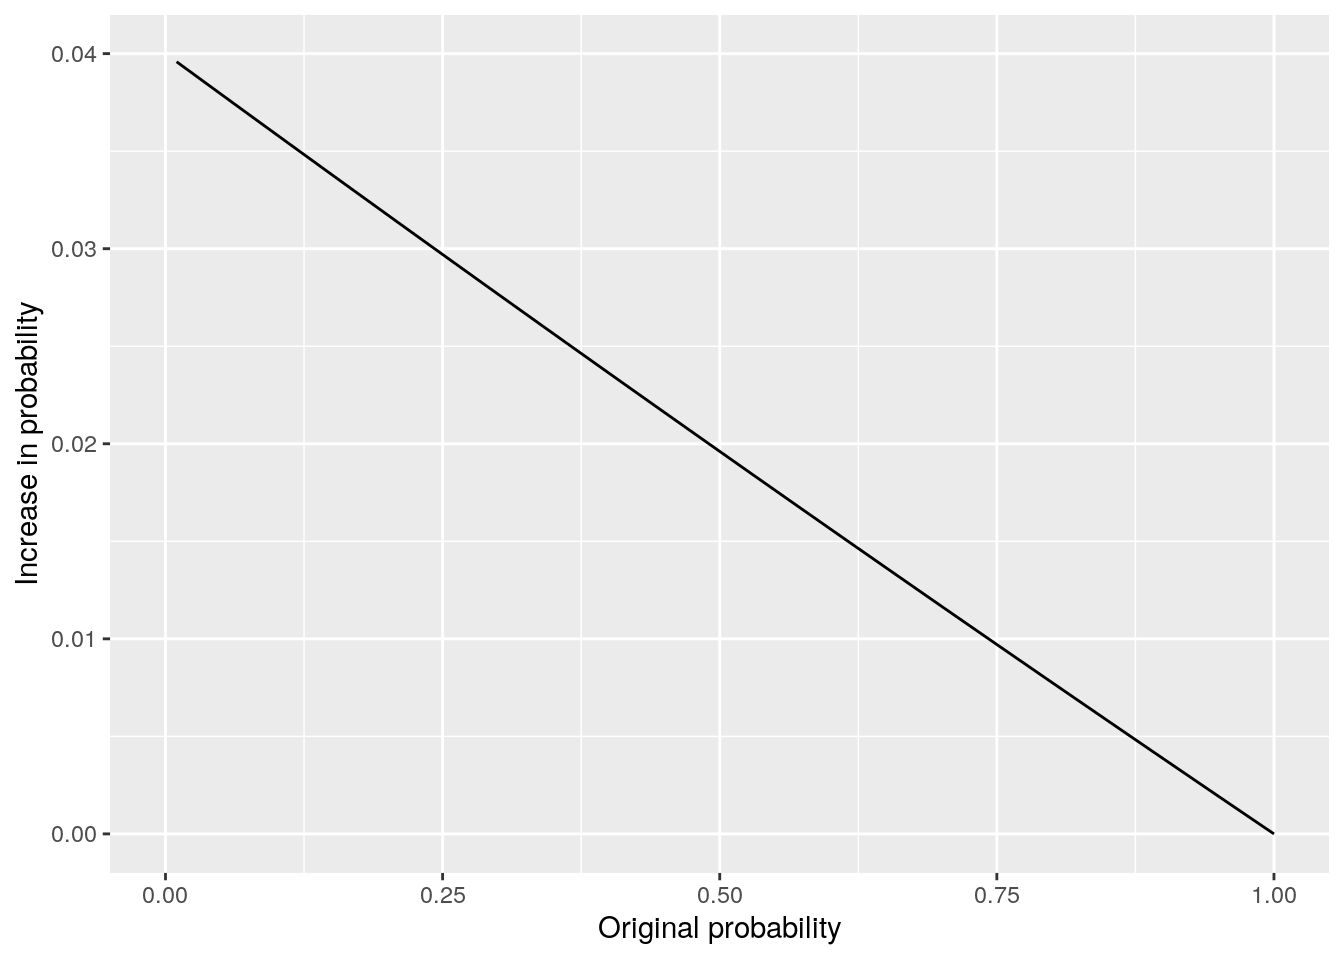 Effect of 4\% increase in odds plotted against original probability